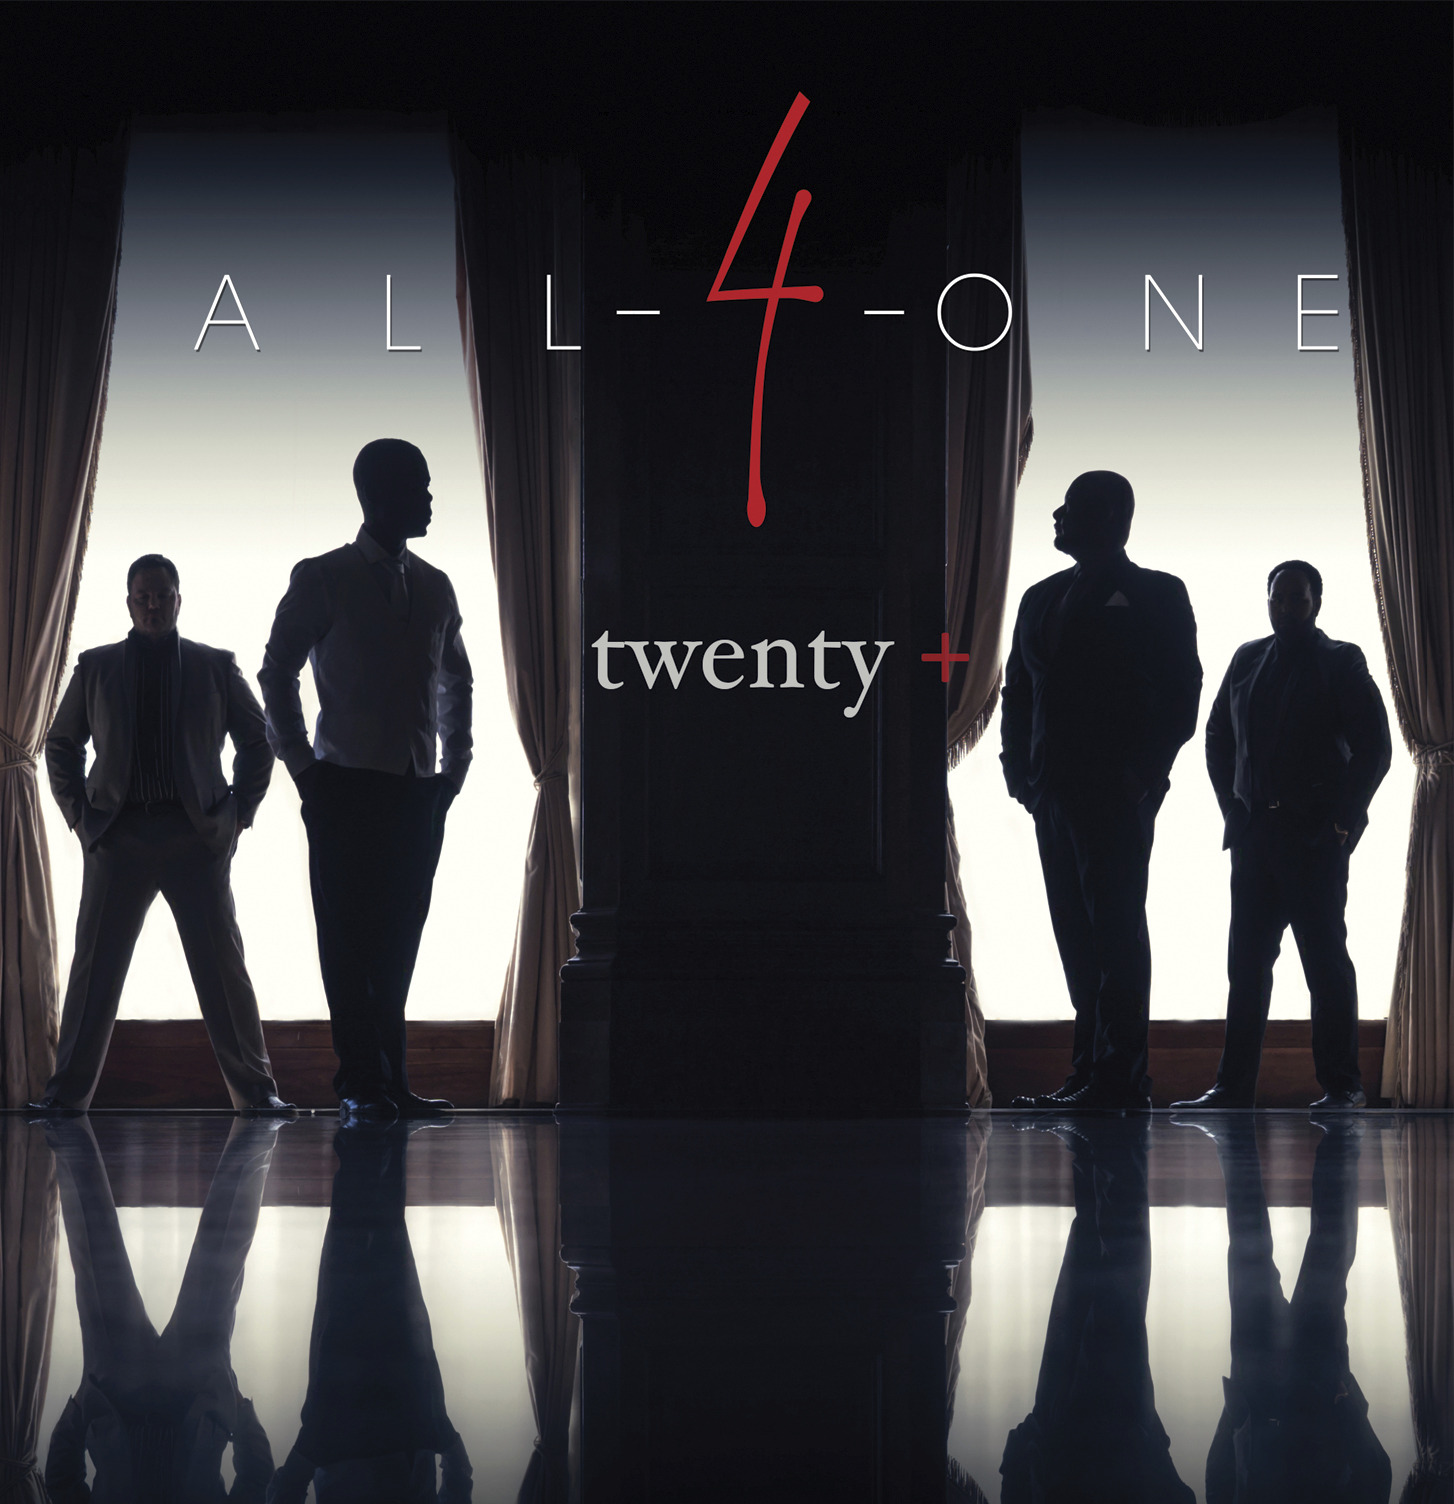 New Music: All 4 One "If We Fall"